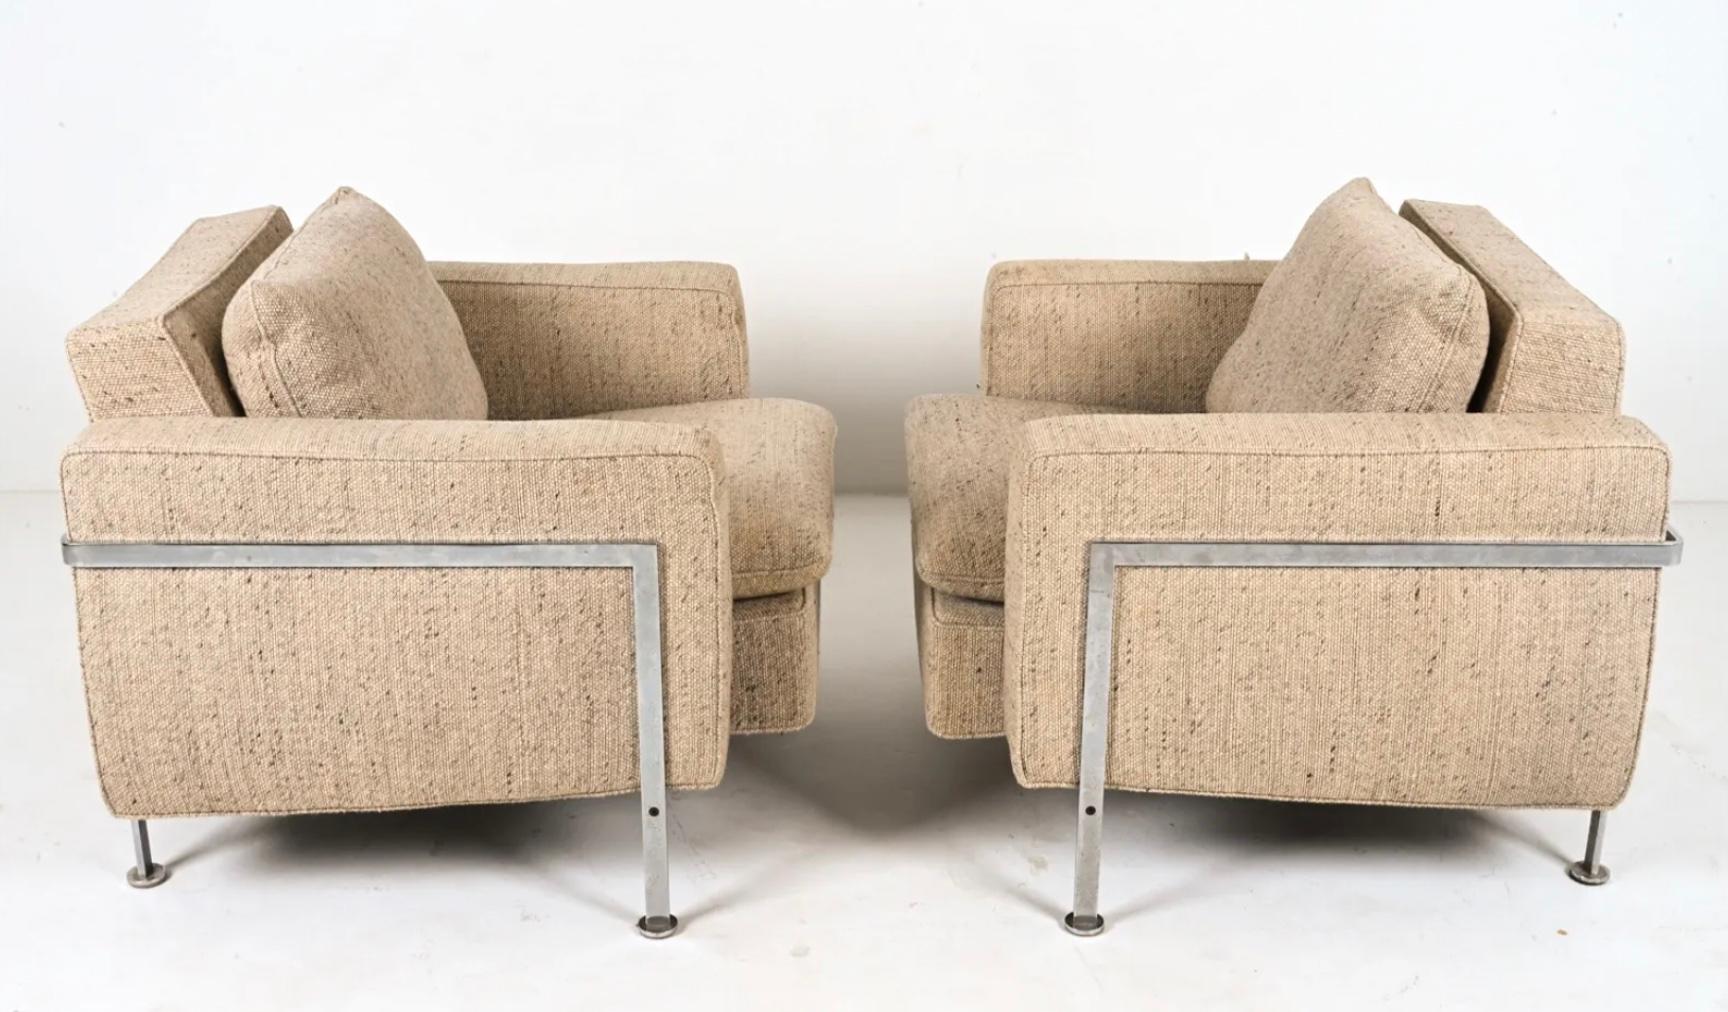 Pair of Mid Century Robert Haussmann Lounge chairs for Stendig De Sede. Nice pair of cube club chairs with flat bar chrome frames and tan woven fabric cushions. Labeled Stendig under cushions. Chrome is in great condition. Made in Switzerland.